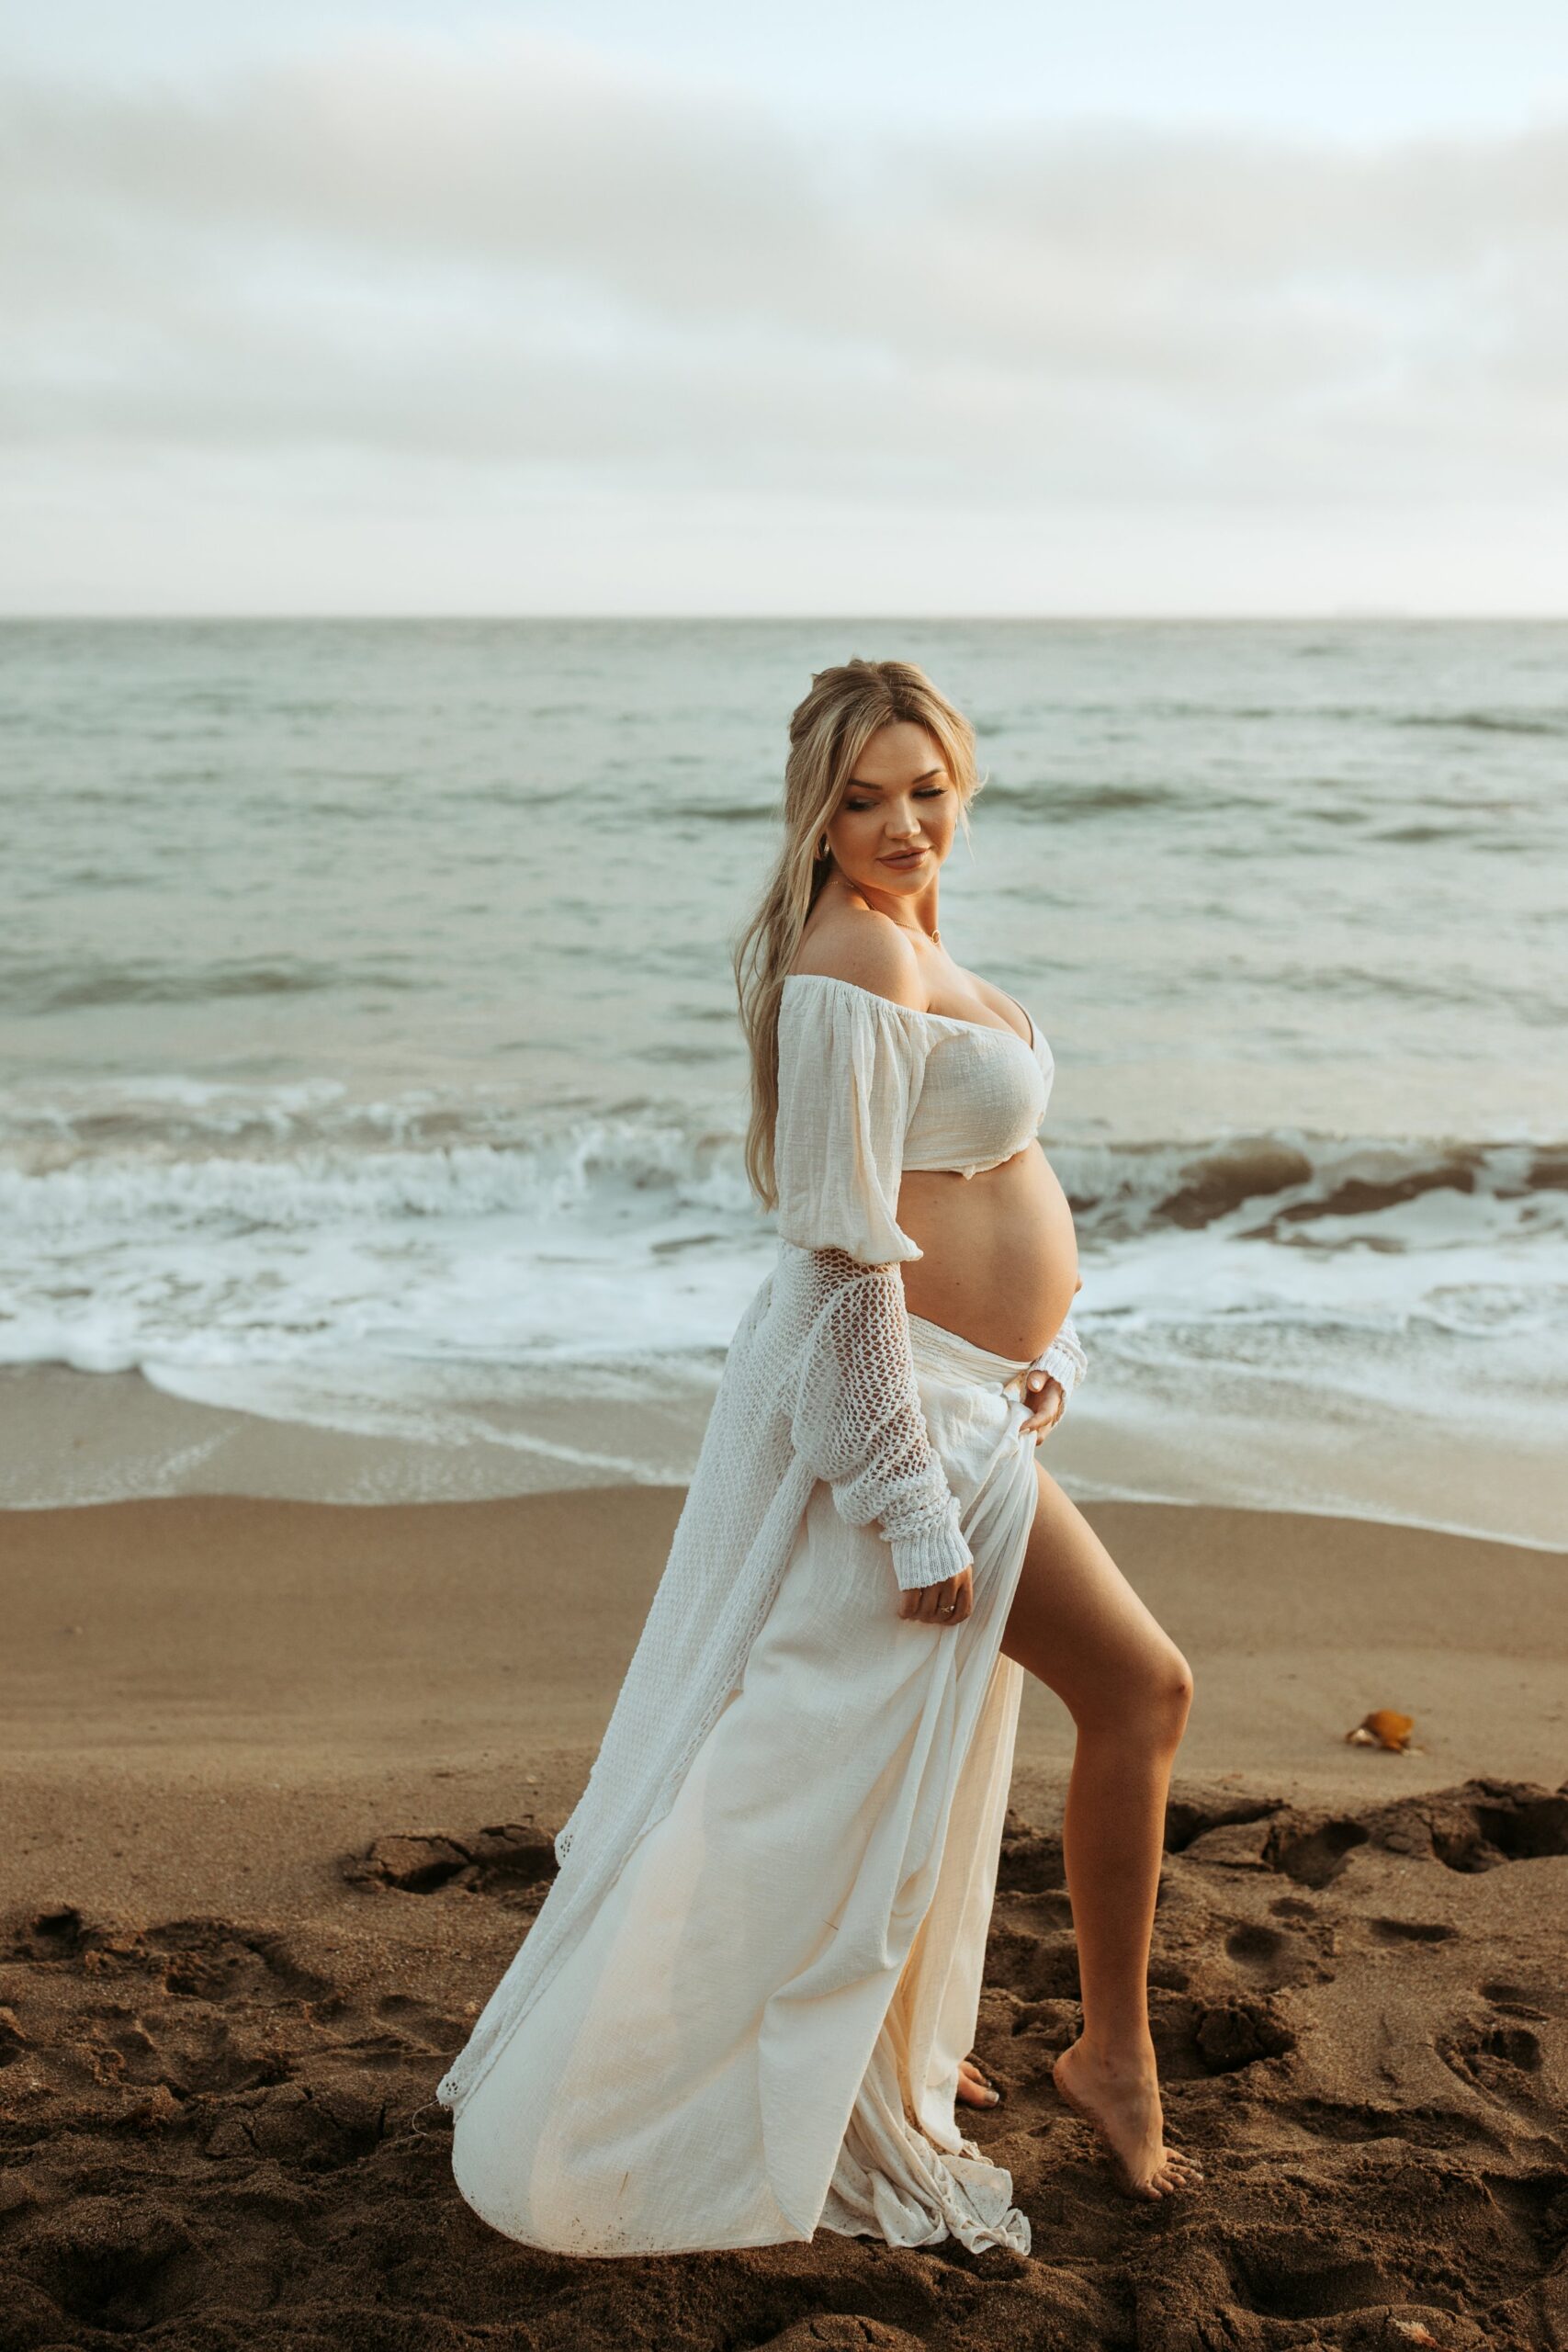 nuture-baby-photography-maternity-beach-session115.jpg